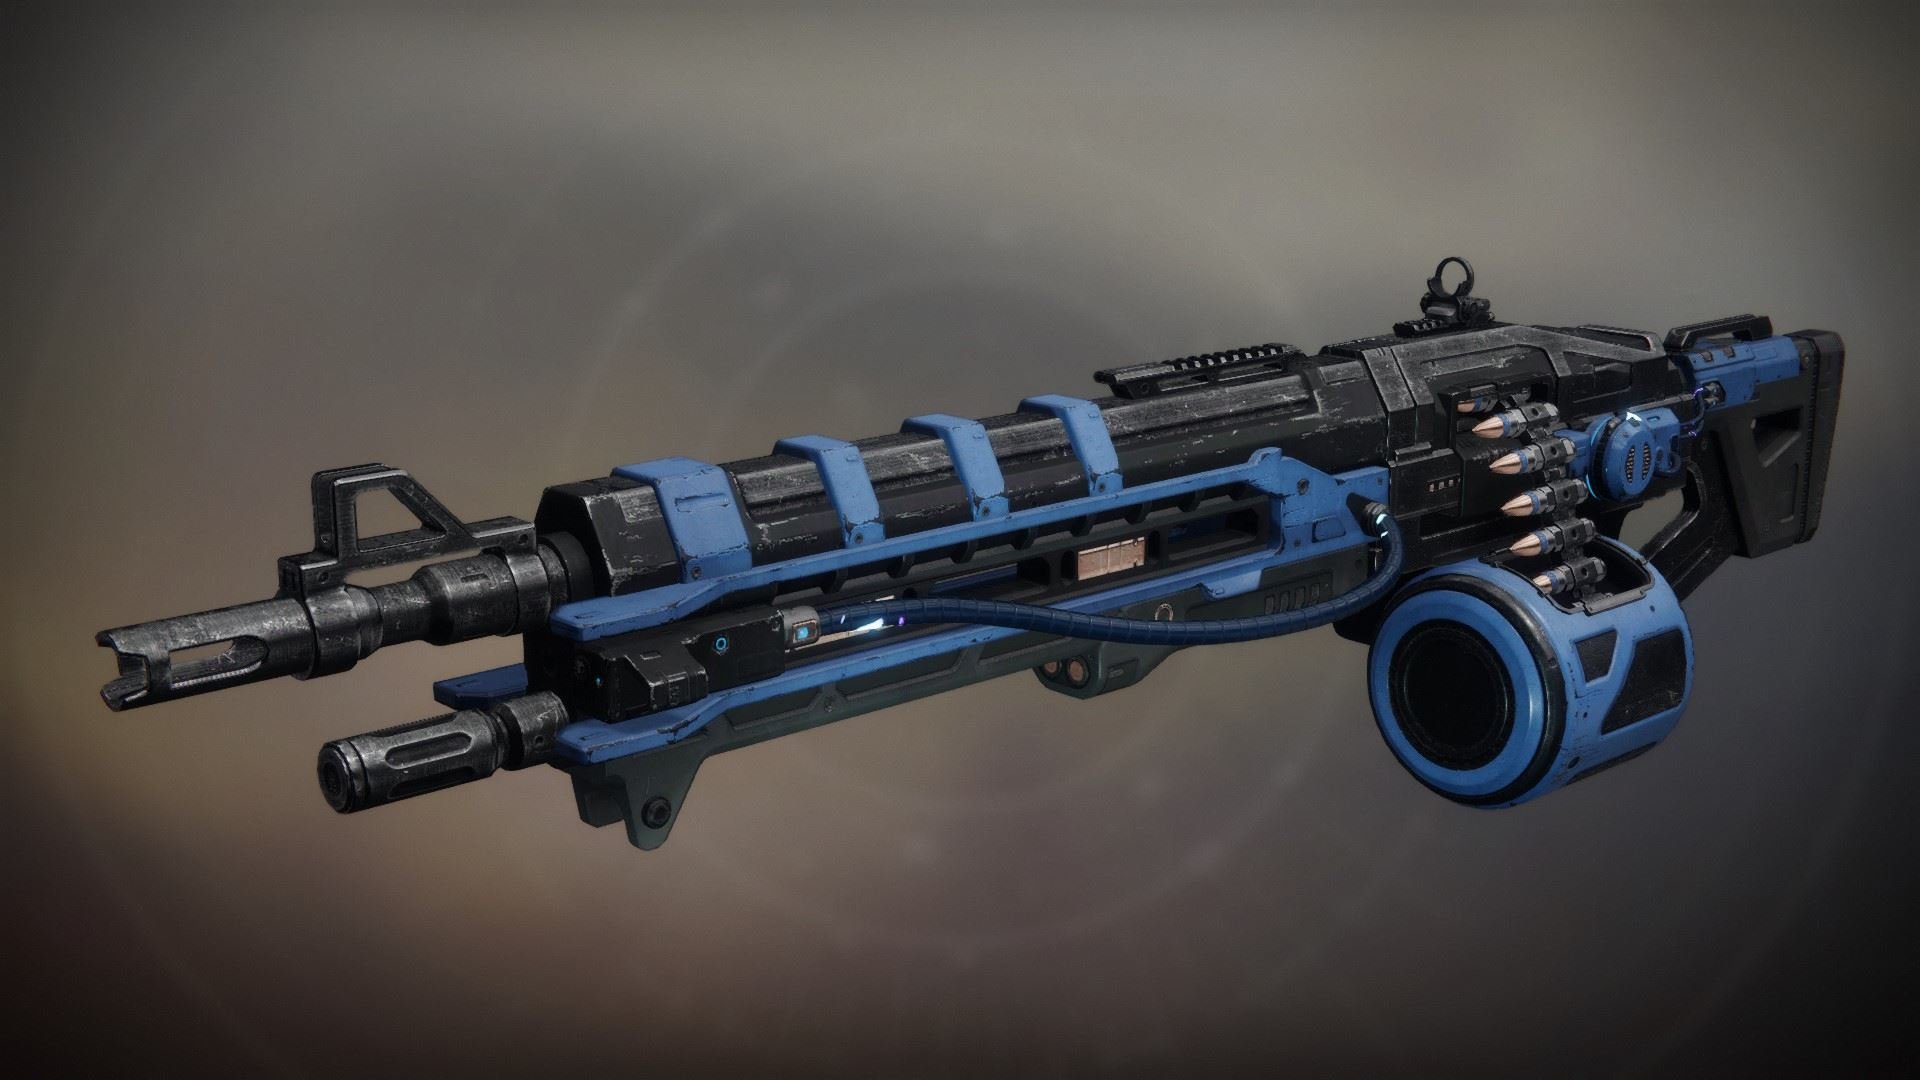 An in-game render of the Thunderlord.